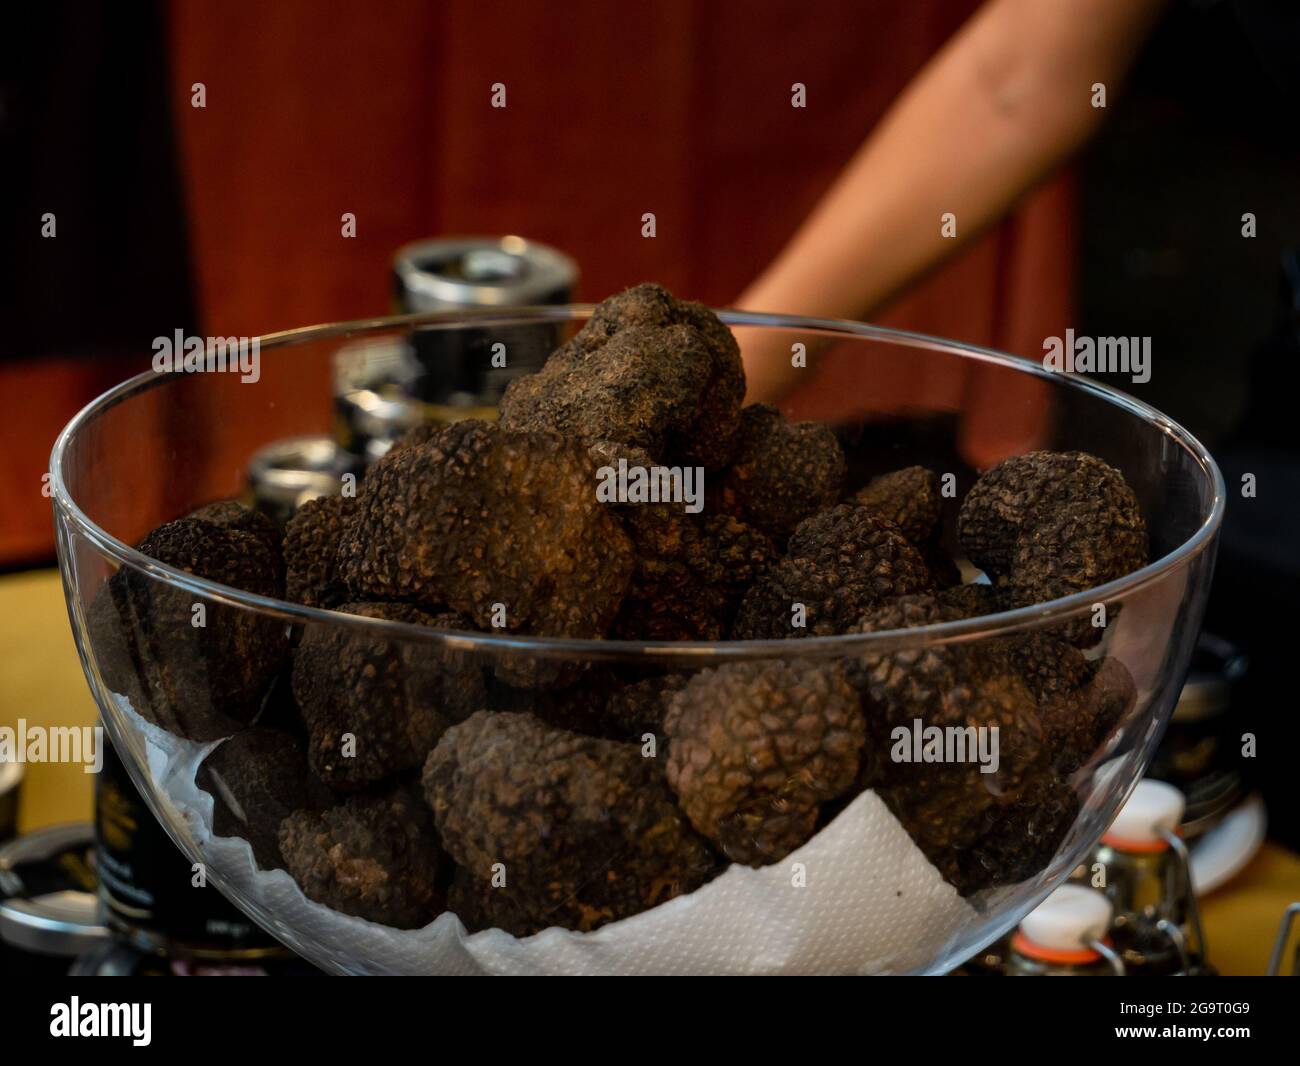 a glass bowl with many truffle mushrooms inside on display at a market counter Stock Photo